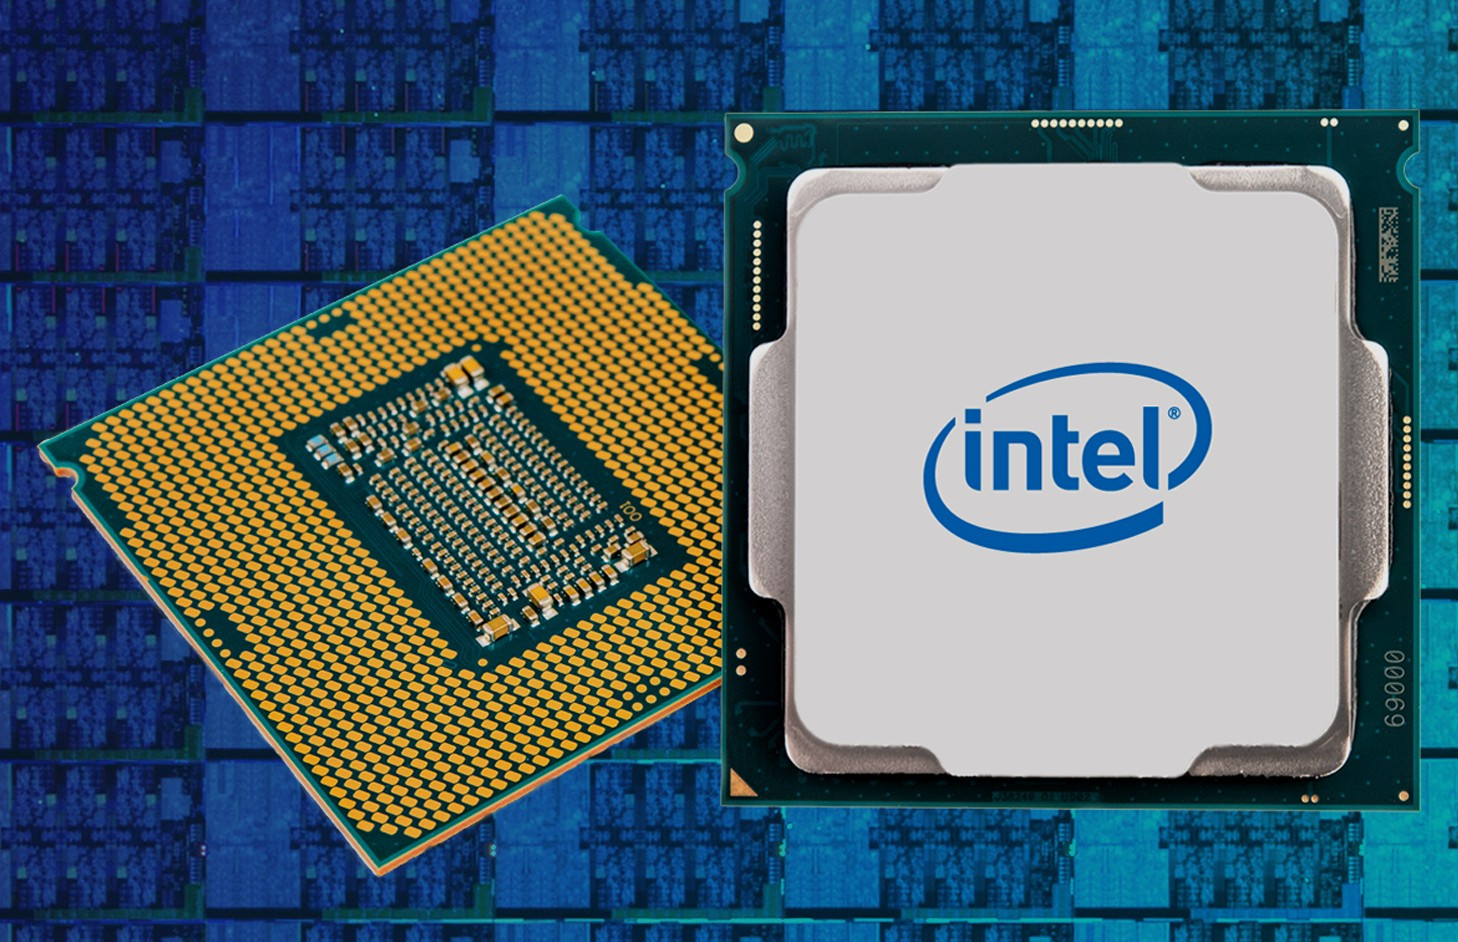 Intel posts Z390 chipset documents on its website